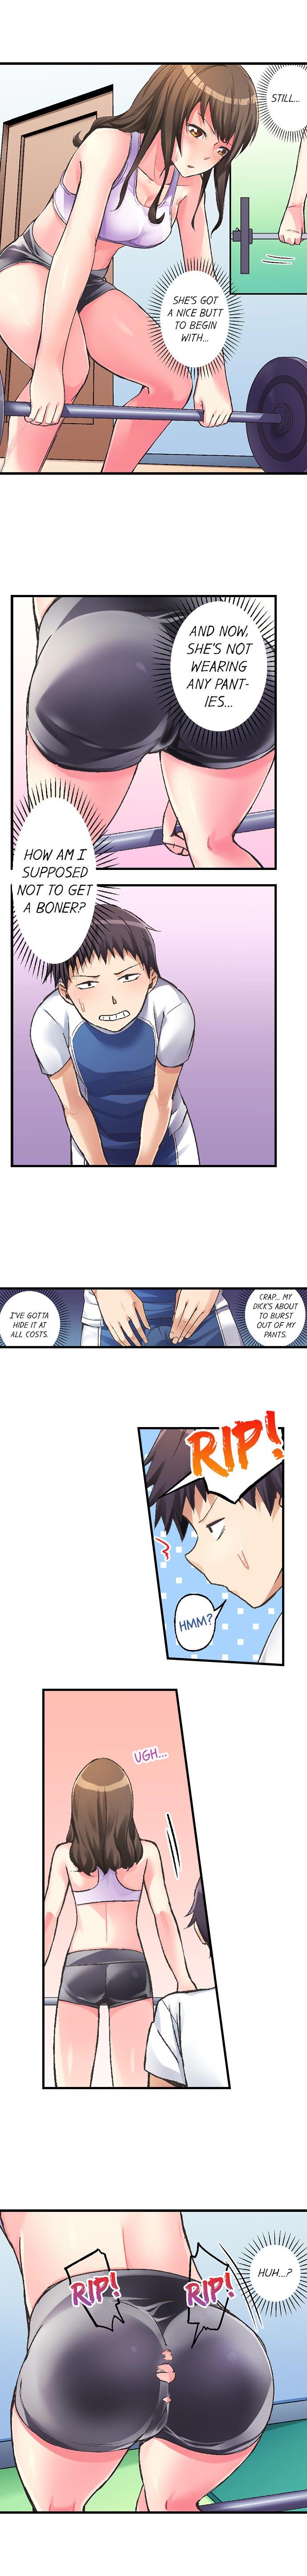 No Panty Booty Workout! Ch. 1 - 4 16